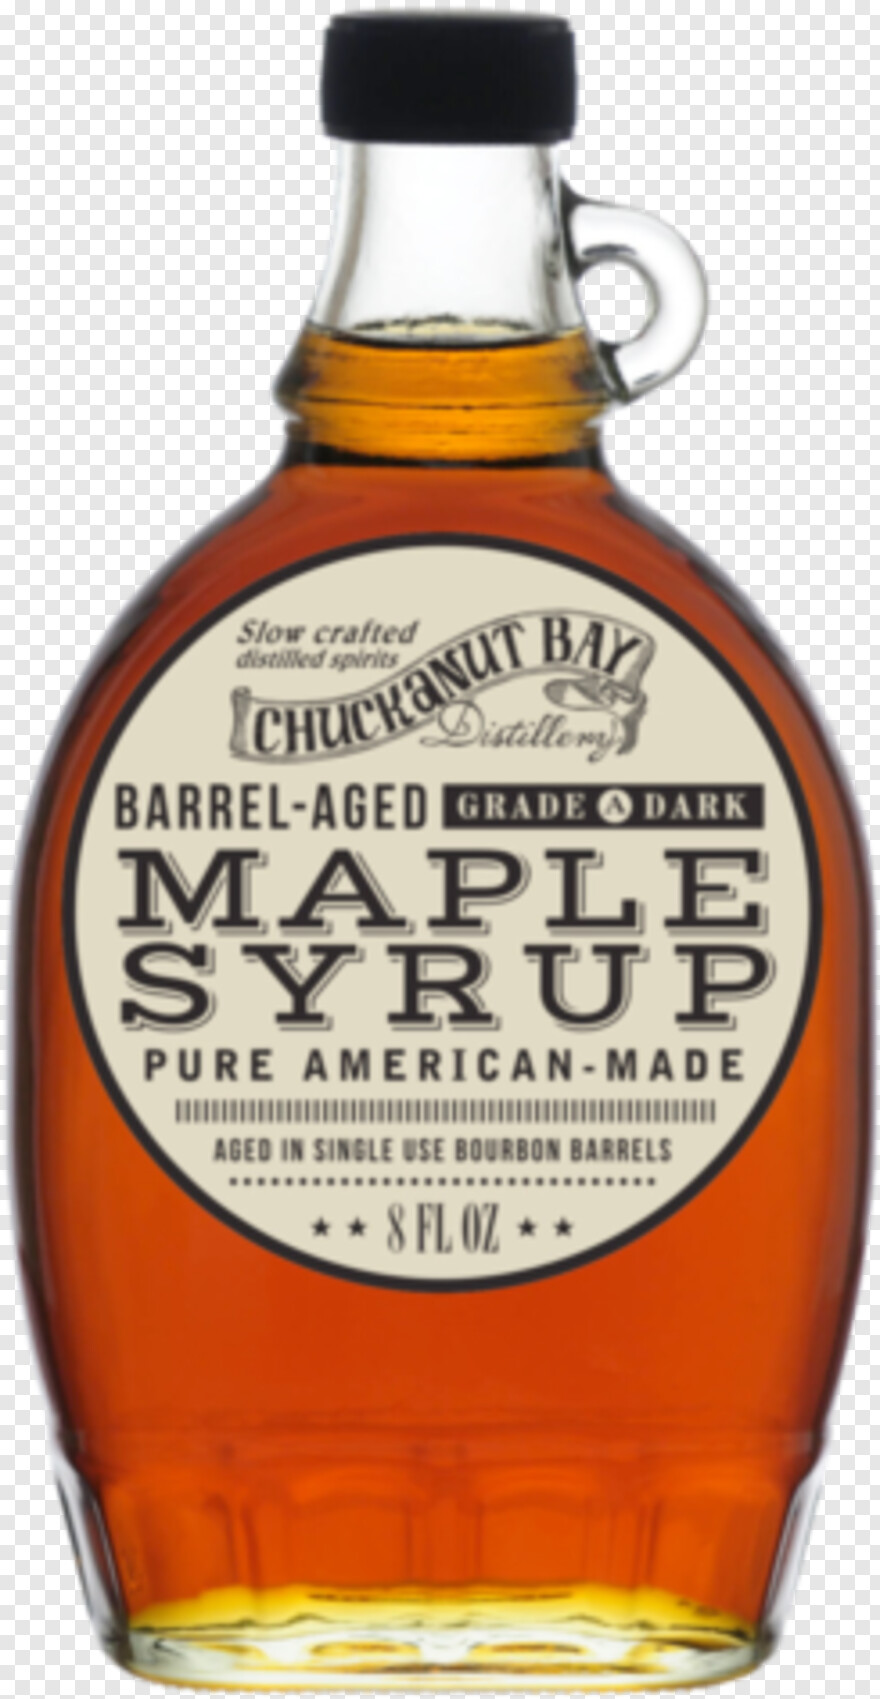 syrup # 556773